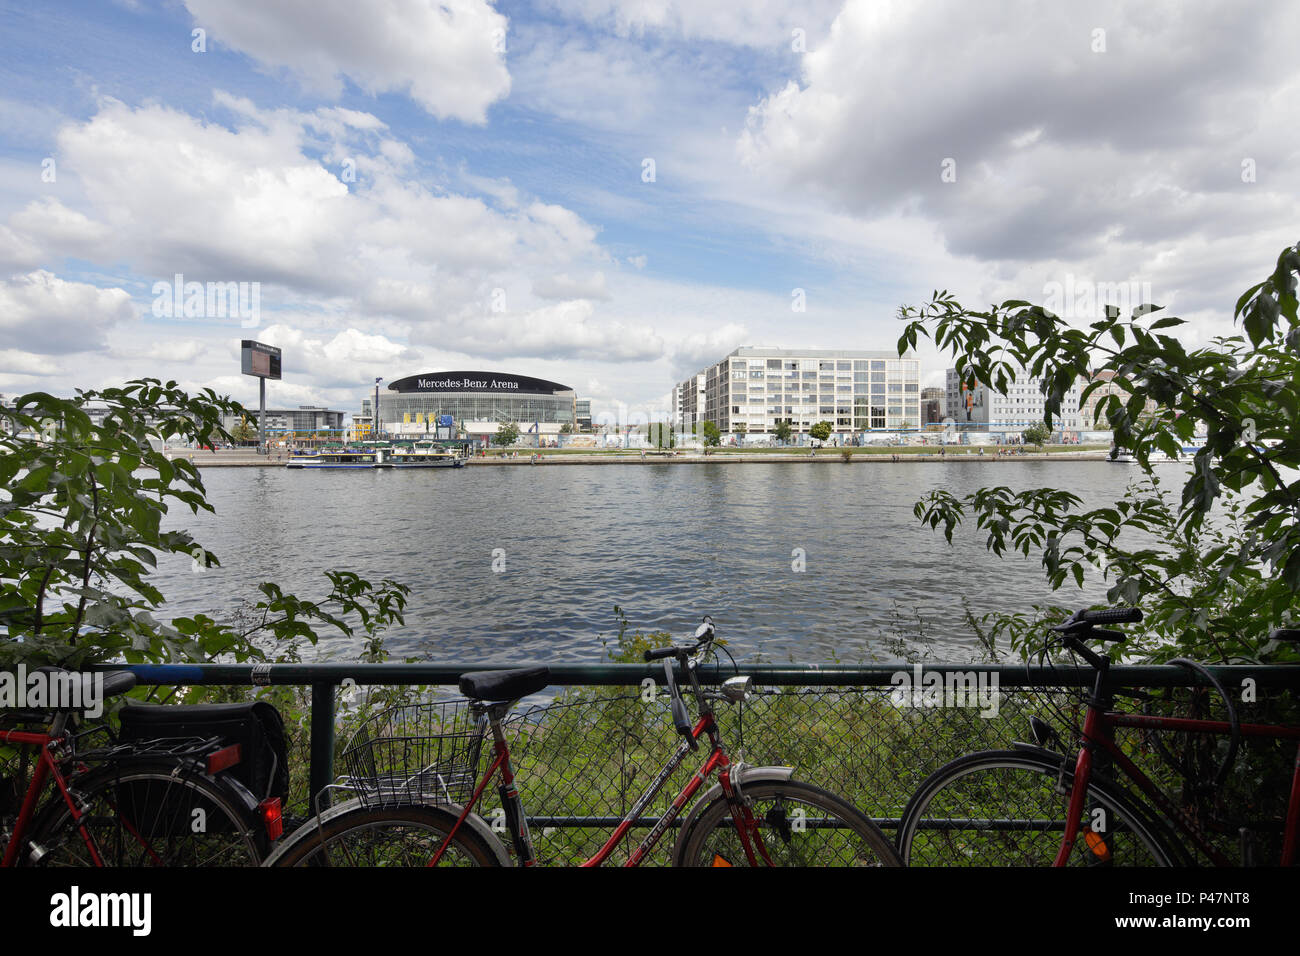 Berlin, Germany, Mercedes-Benz Arena and bicycles on Kreuzberger Ufer Stock Photo